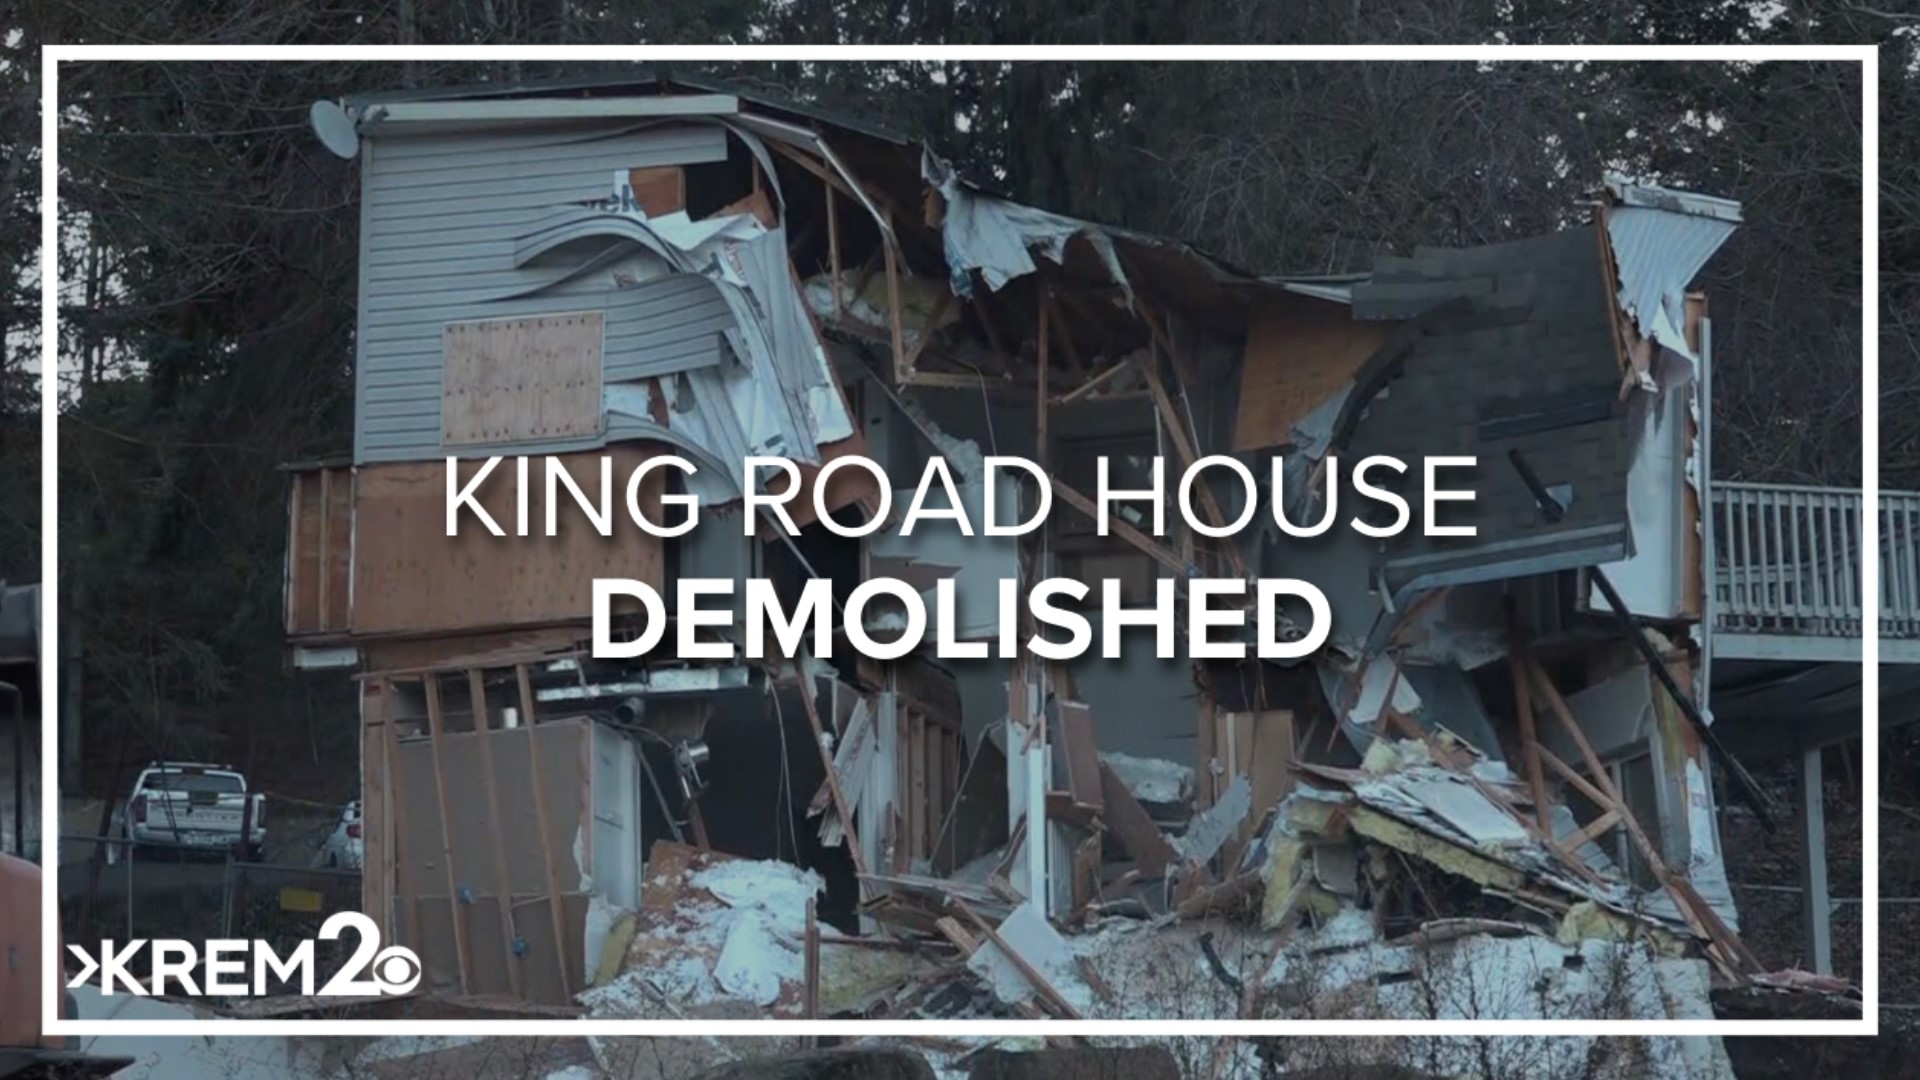 Thursday's demolition served as a milestone in the case of four University of Idaho students who were brutally killed inside the home.